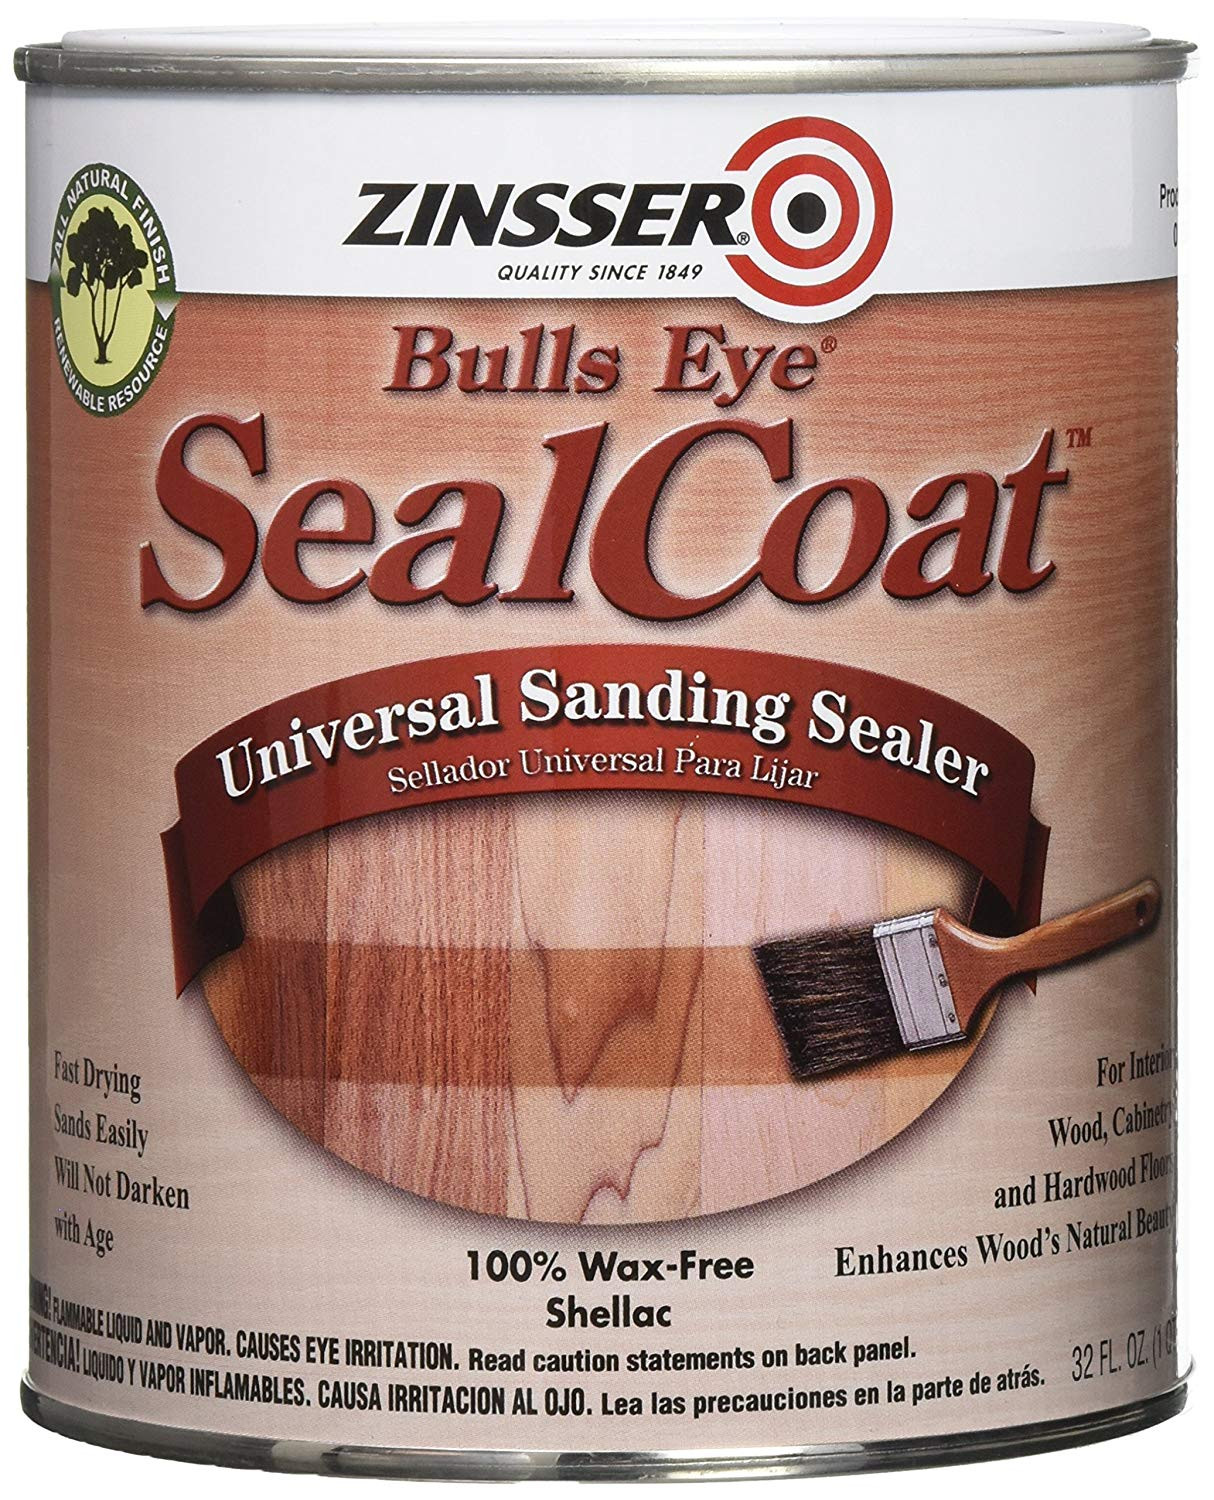 16 Perfect How Much Does It Cost to Refinish Hardwood Floors Myself 2024 free download how much does it cost to refinish hardwood floors myself of rust oleum zinsser 854 1 quart bulls eye sealcoat universal sanding with regard to rust oleum zinsser 854 1 quart bulls eye sealco